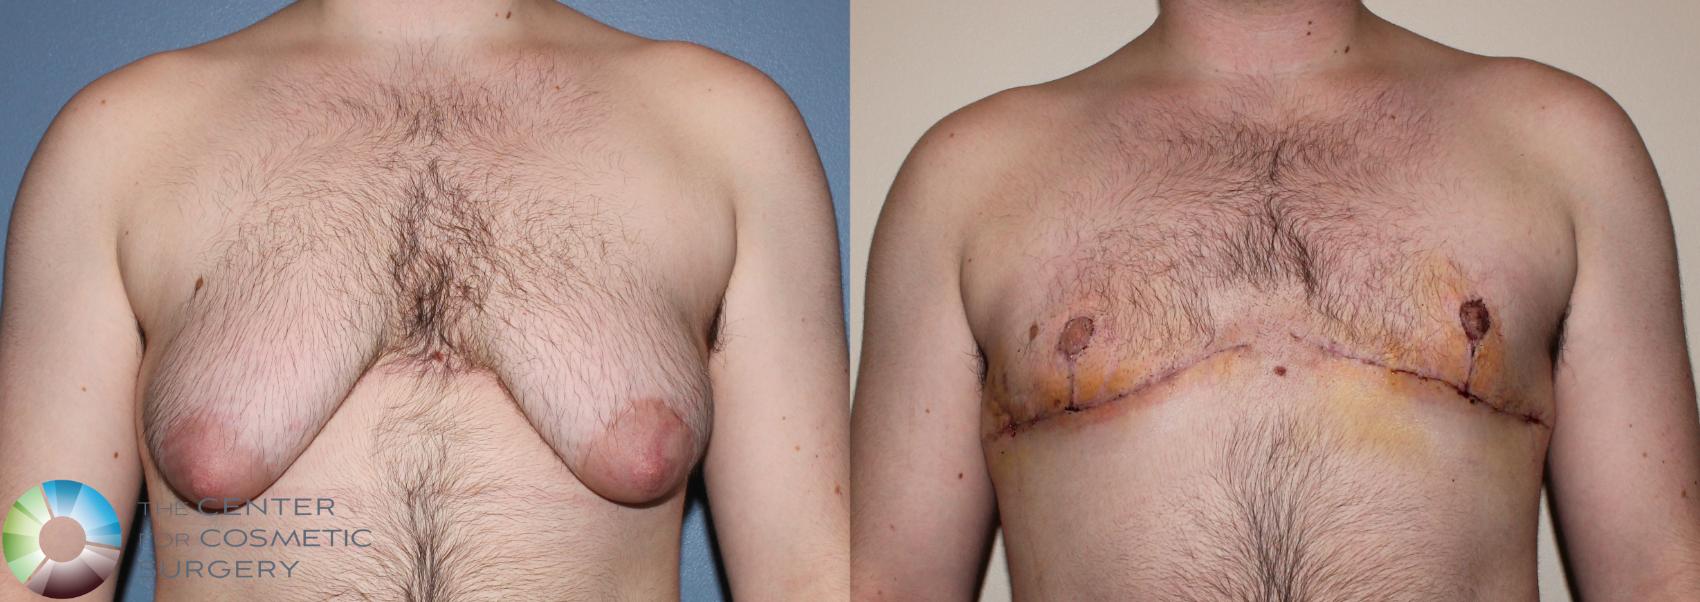 Before & After FTM Top Surgery/Chest Masculinization Case 11275 Front View in Golden, CO